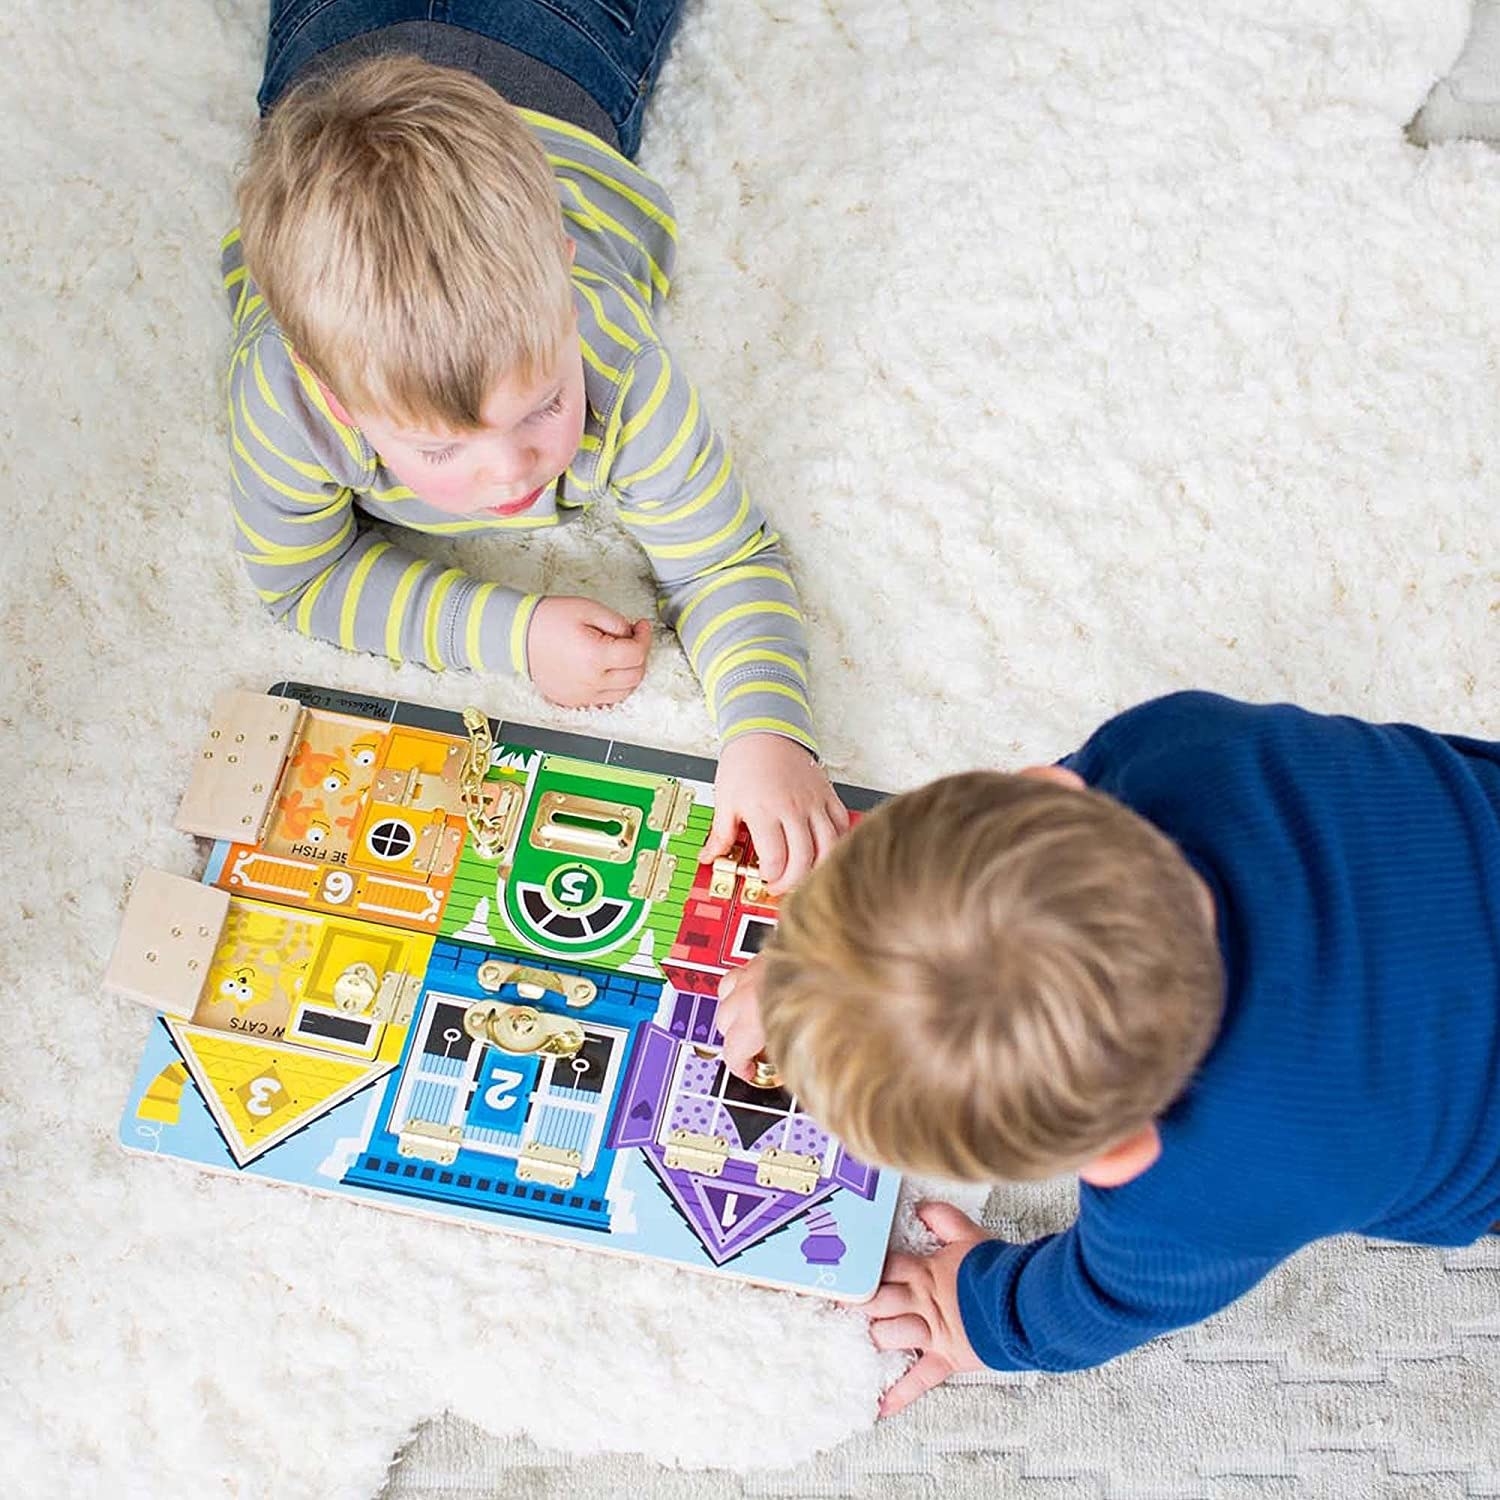 Two kids playing with the board on a carpet